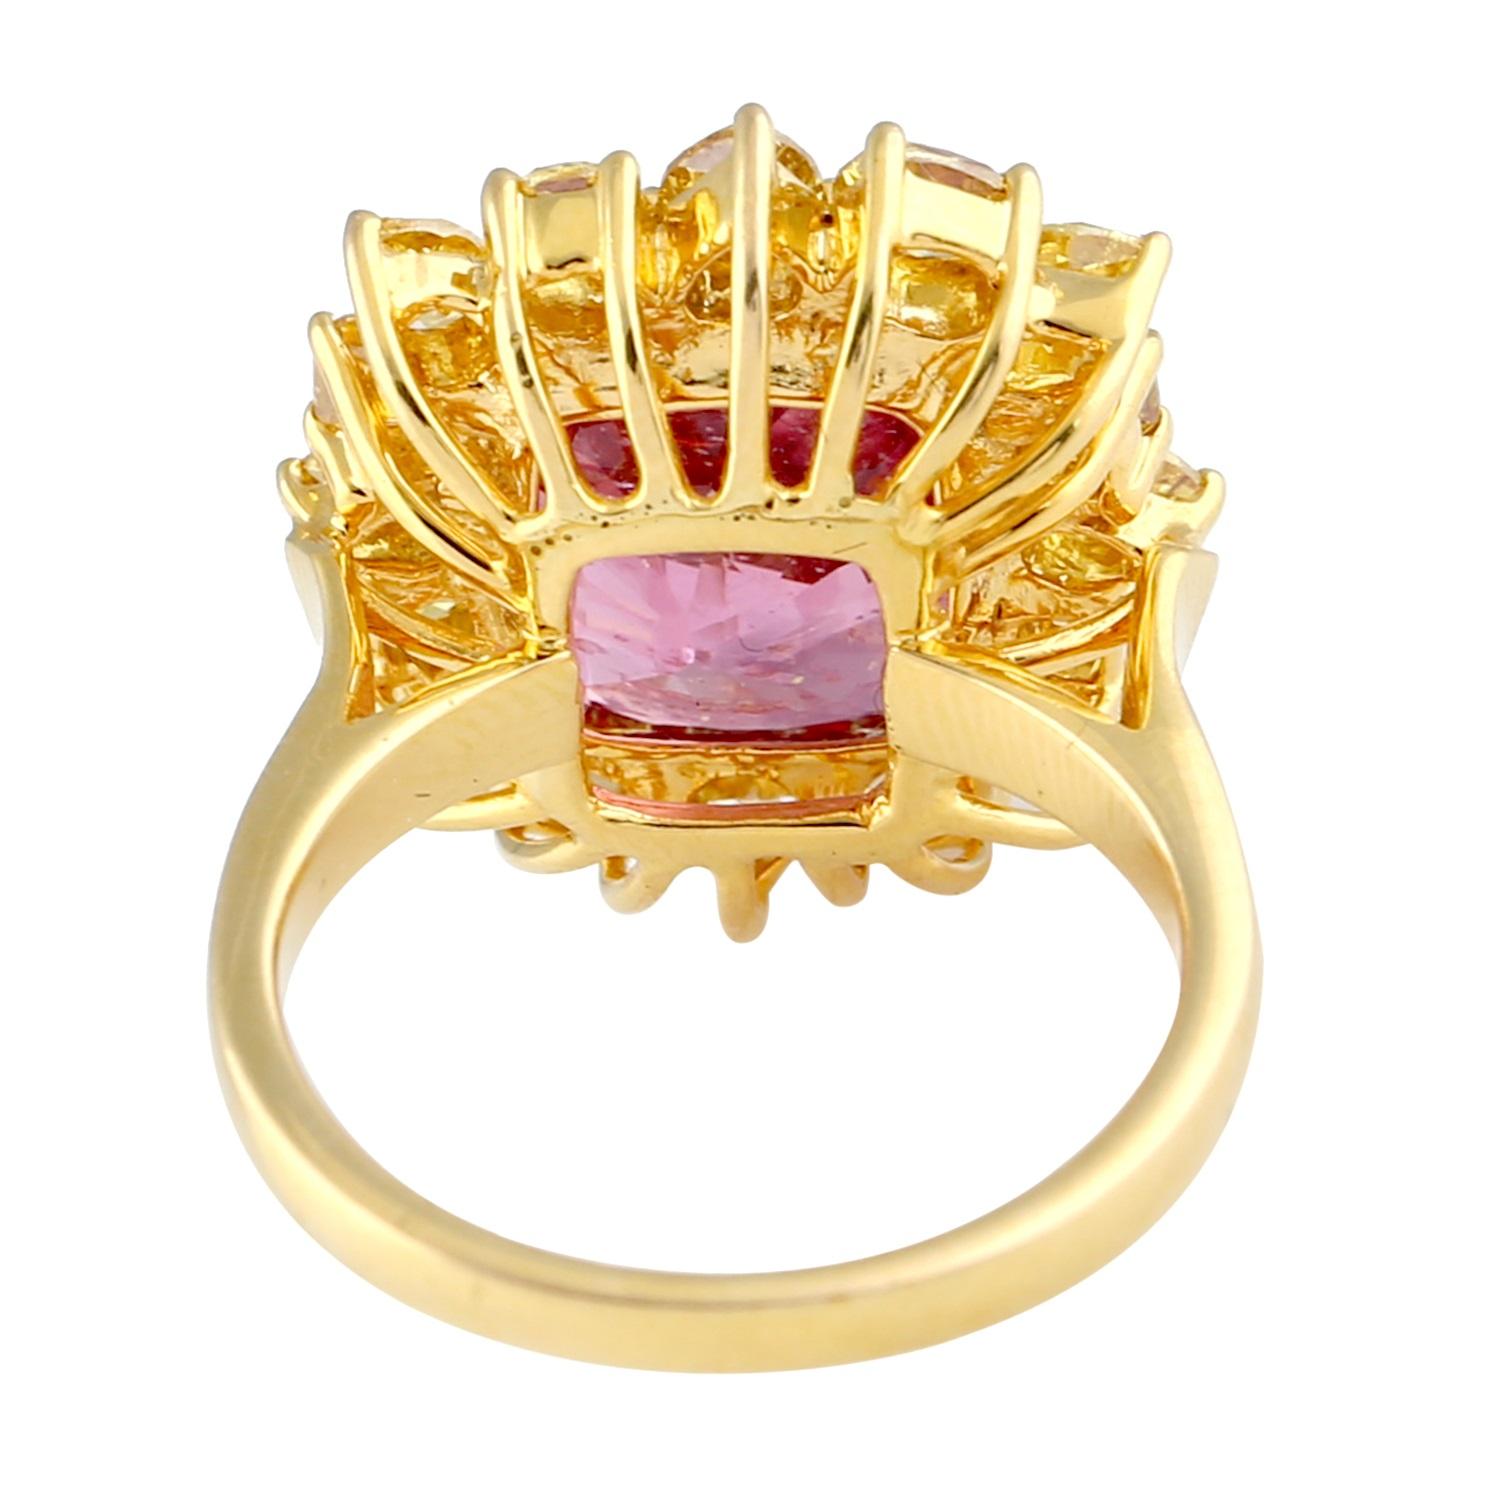 Brilliant Cut Red Spinel Ring with Yellow Diamonds in 18 Karat Yellow Gold